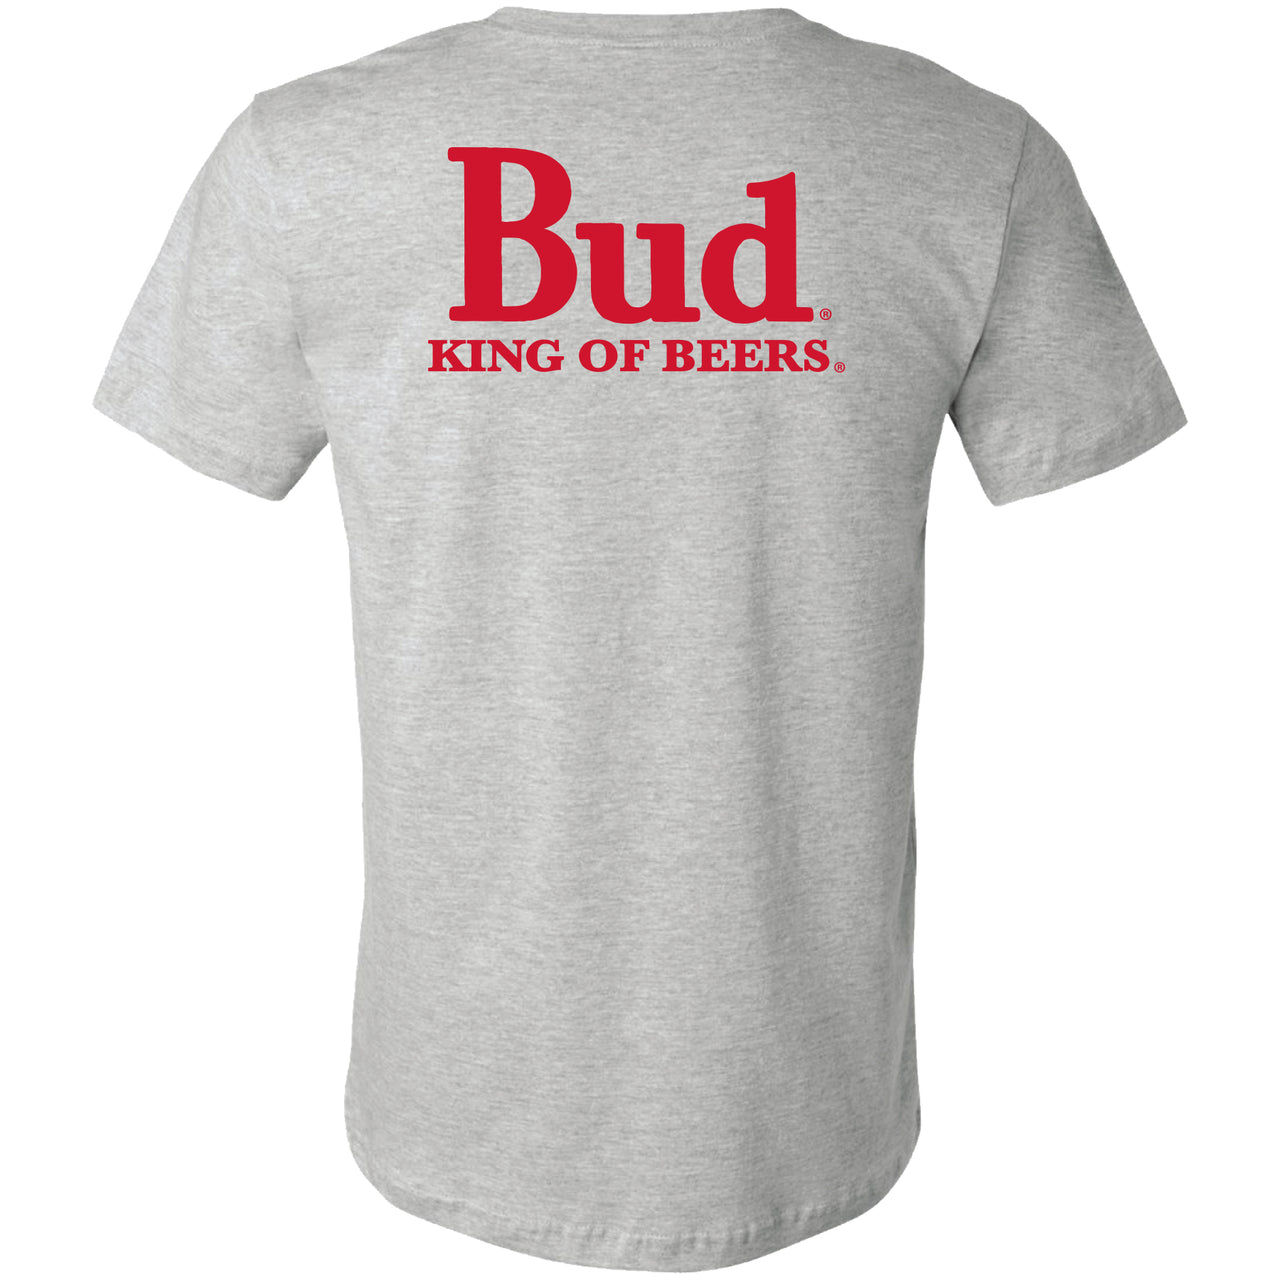 Budweiser - King of Beers 2-Sided T-Shirt